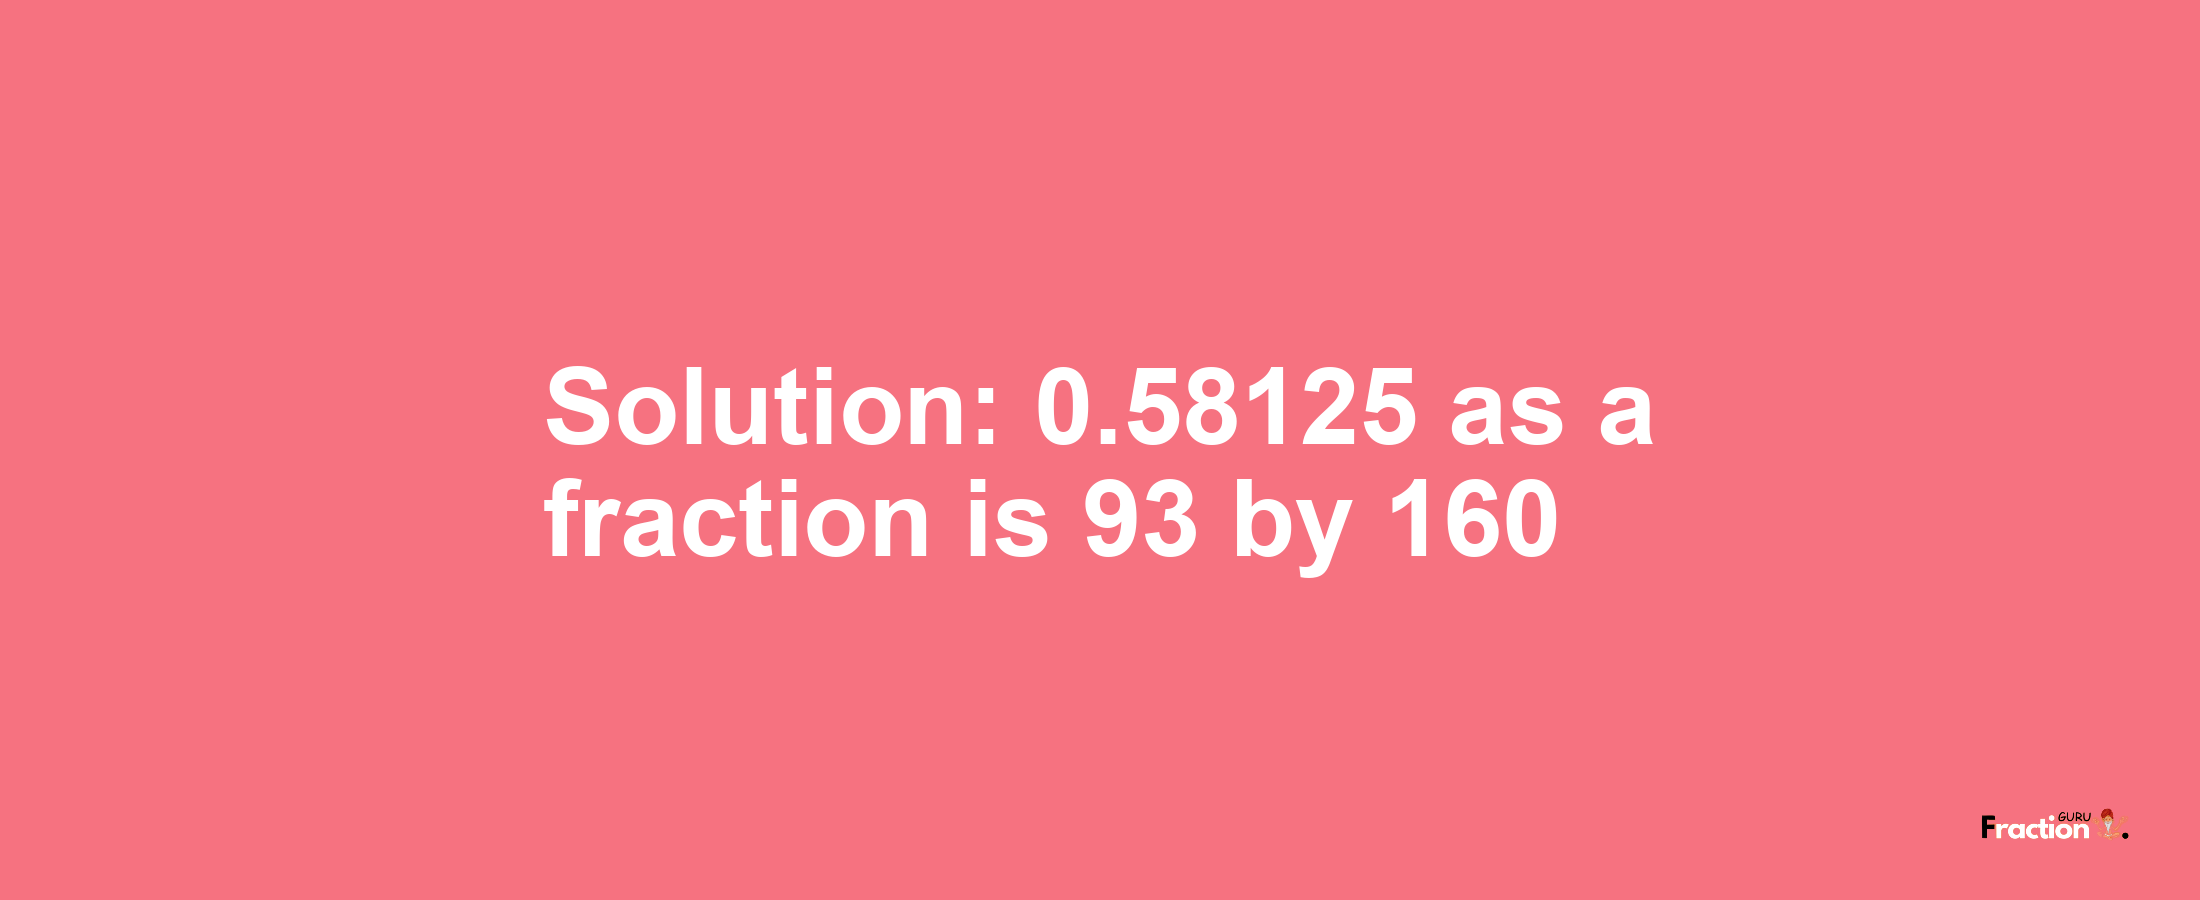 Solution:0.58125 as a fraction is 93/160